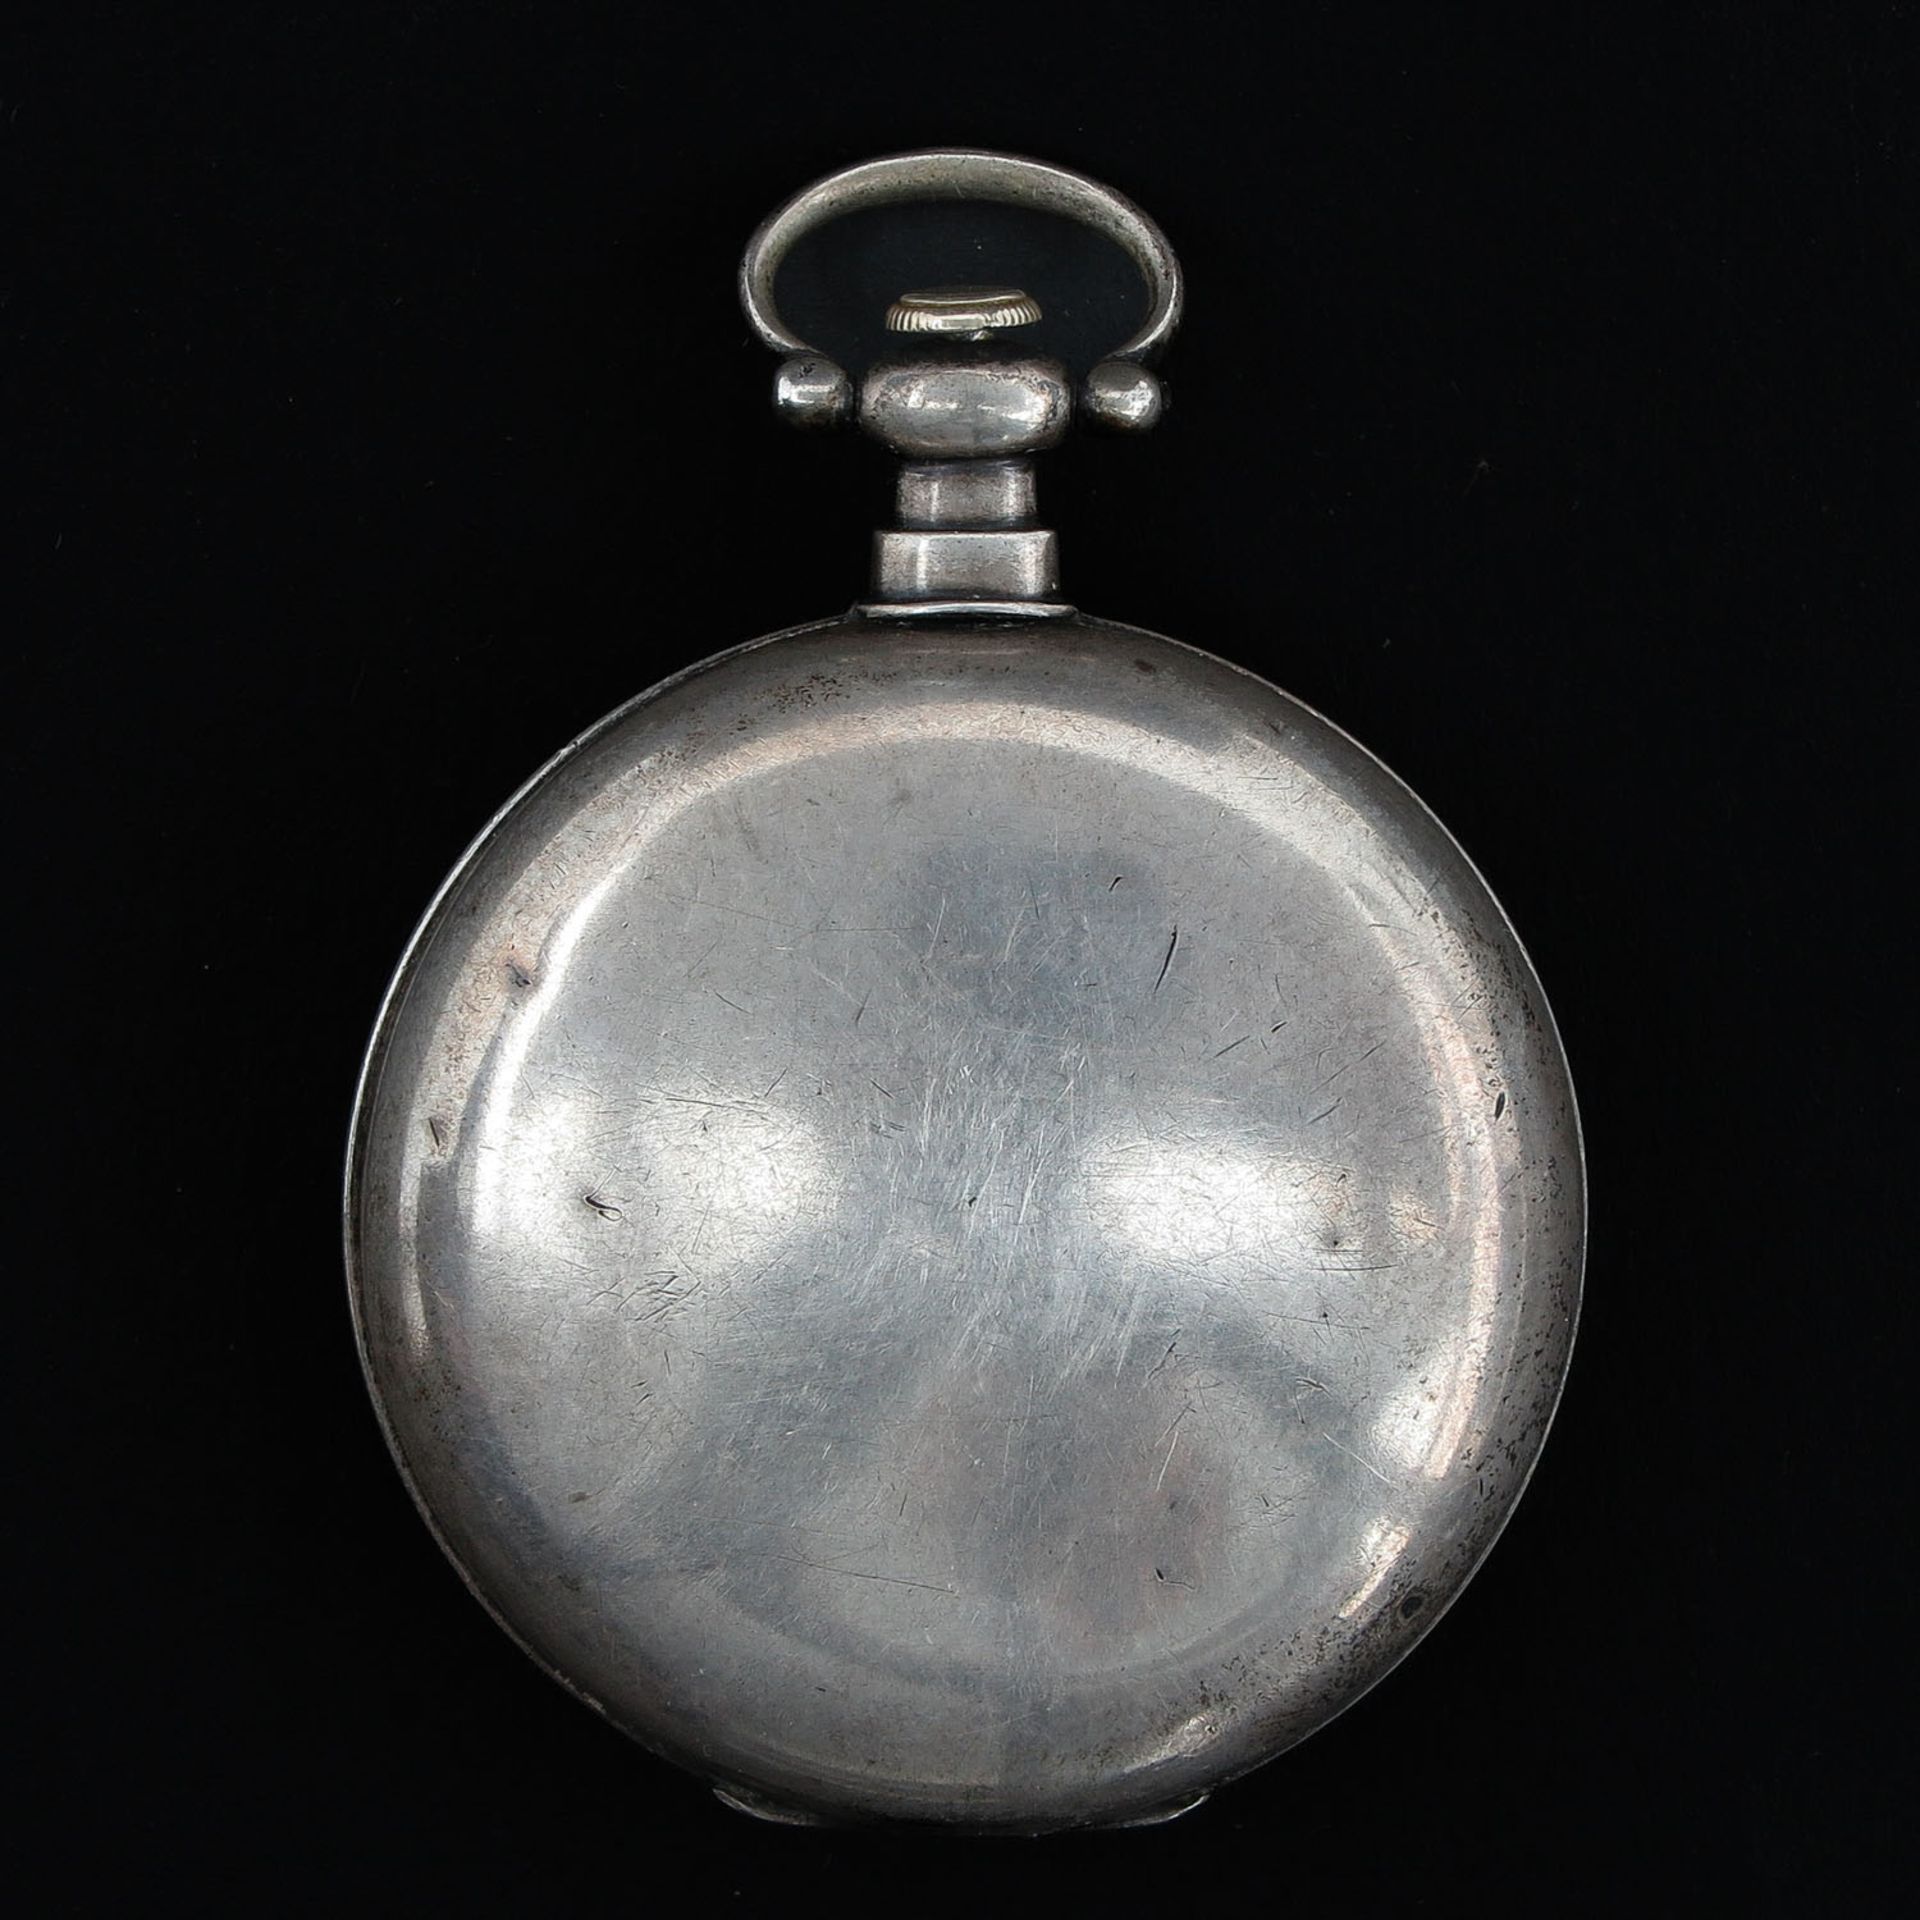 A Chinese Silver Pocket Watch - Image 2 of 5